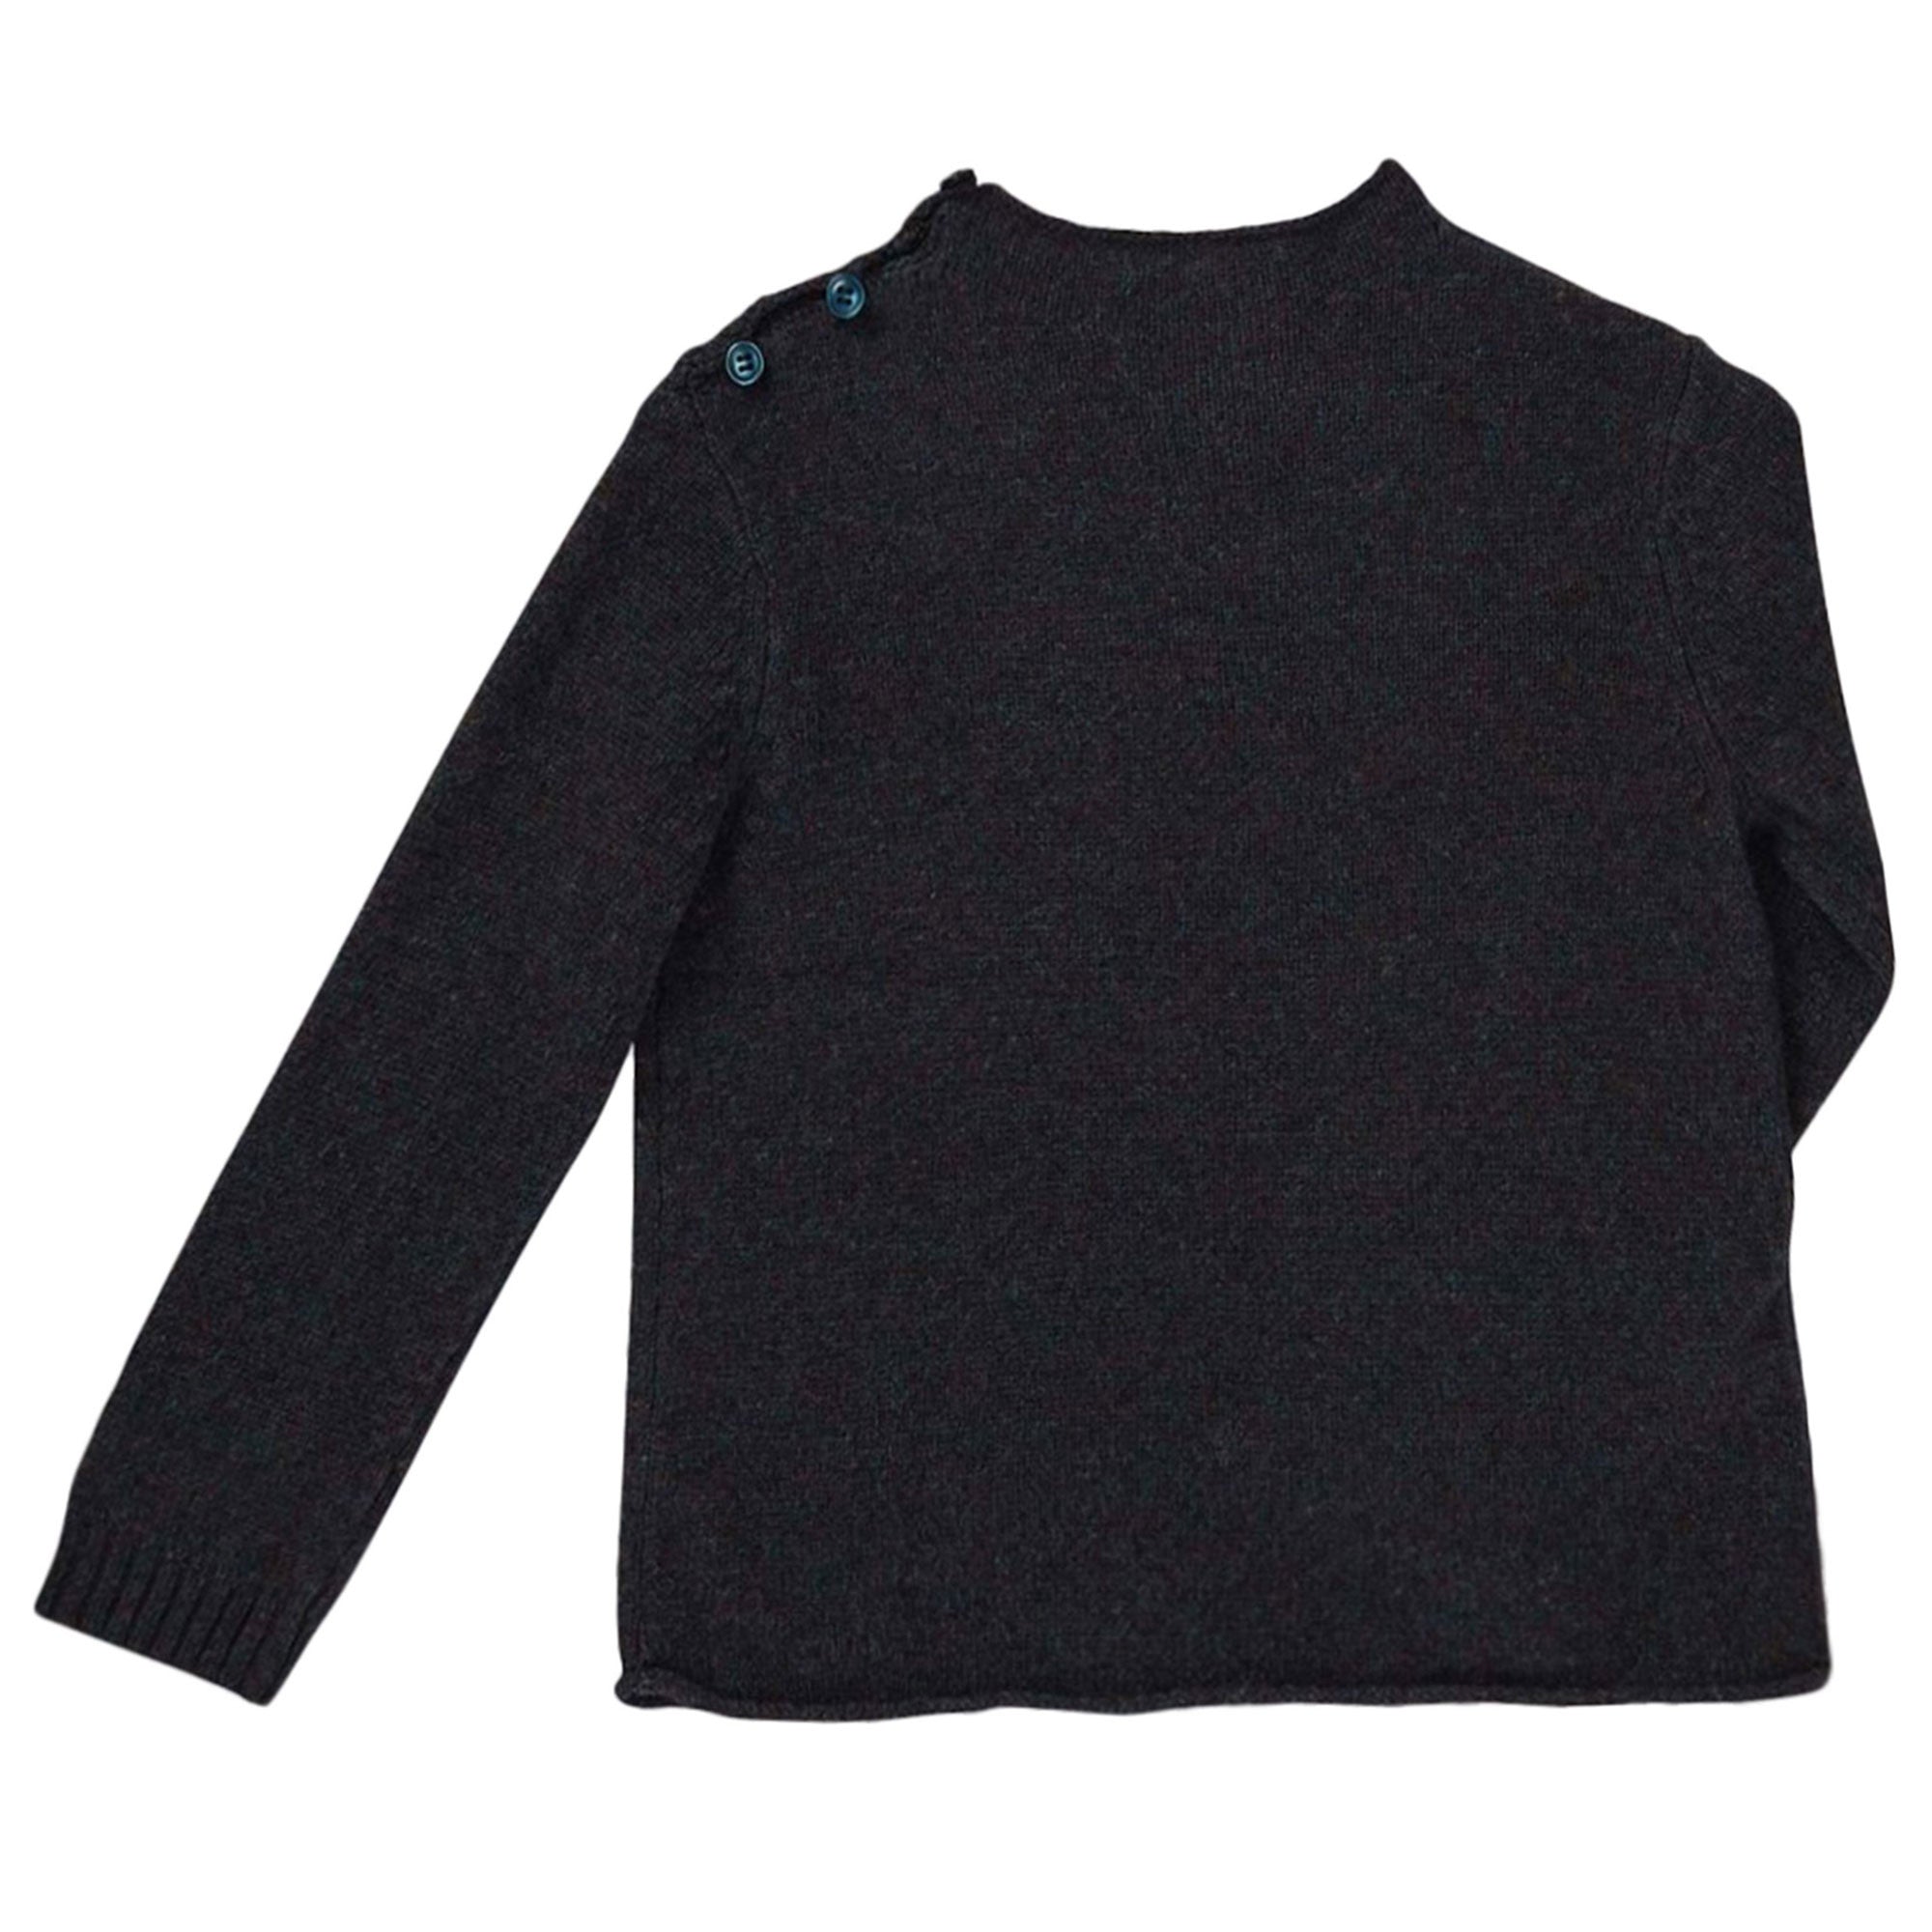 Boys Navy Blue Wool Knitted Sweater - CÉMAROSE | Children's Fashion Store - 2